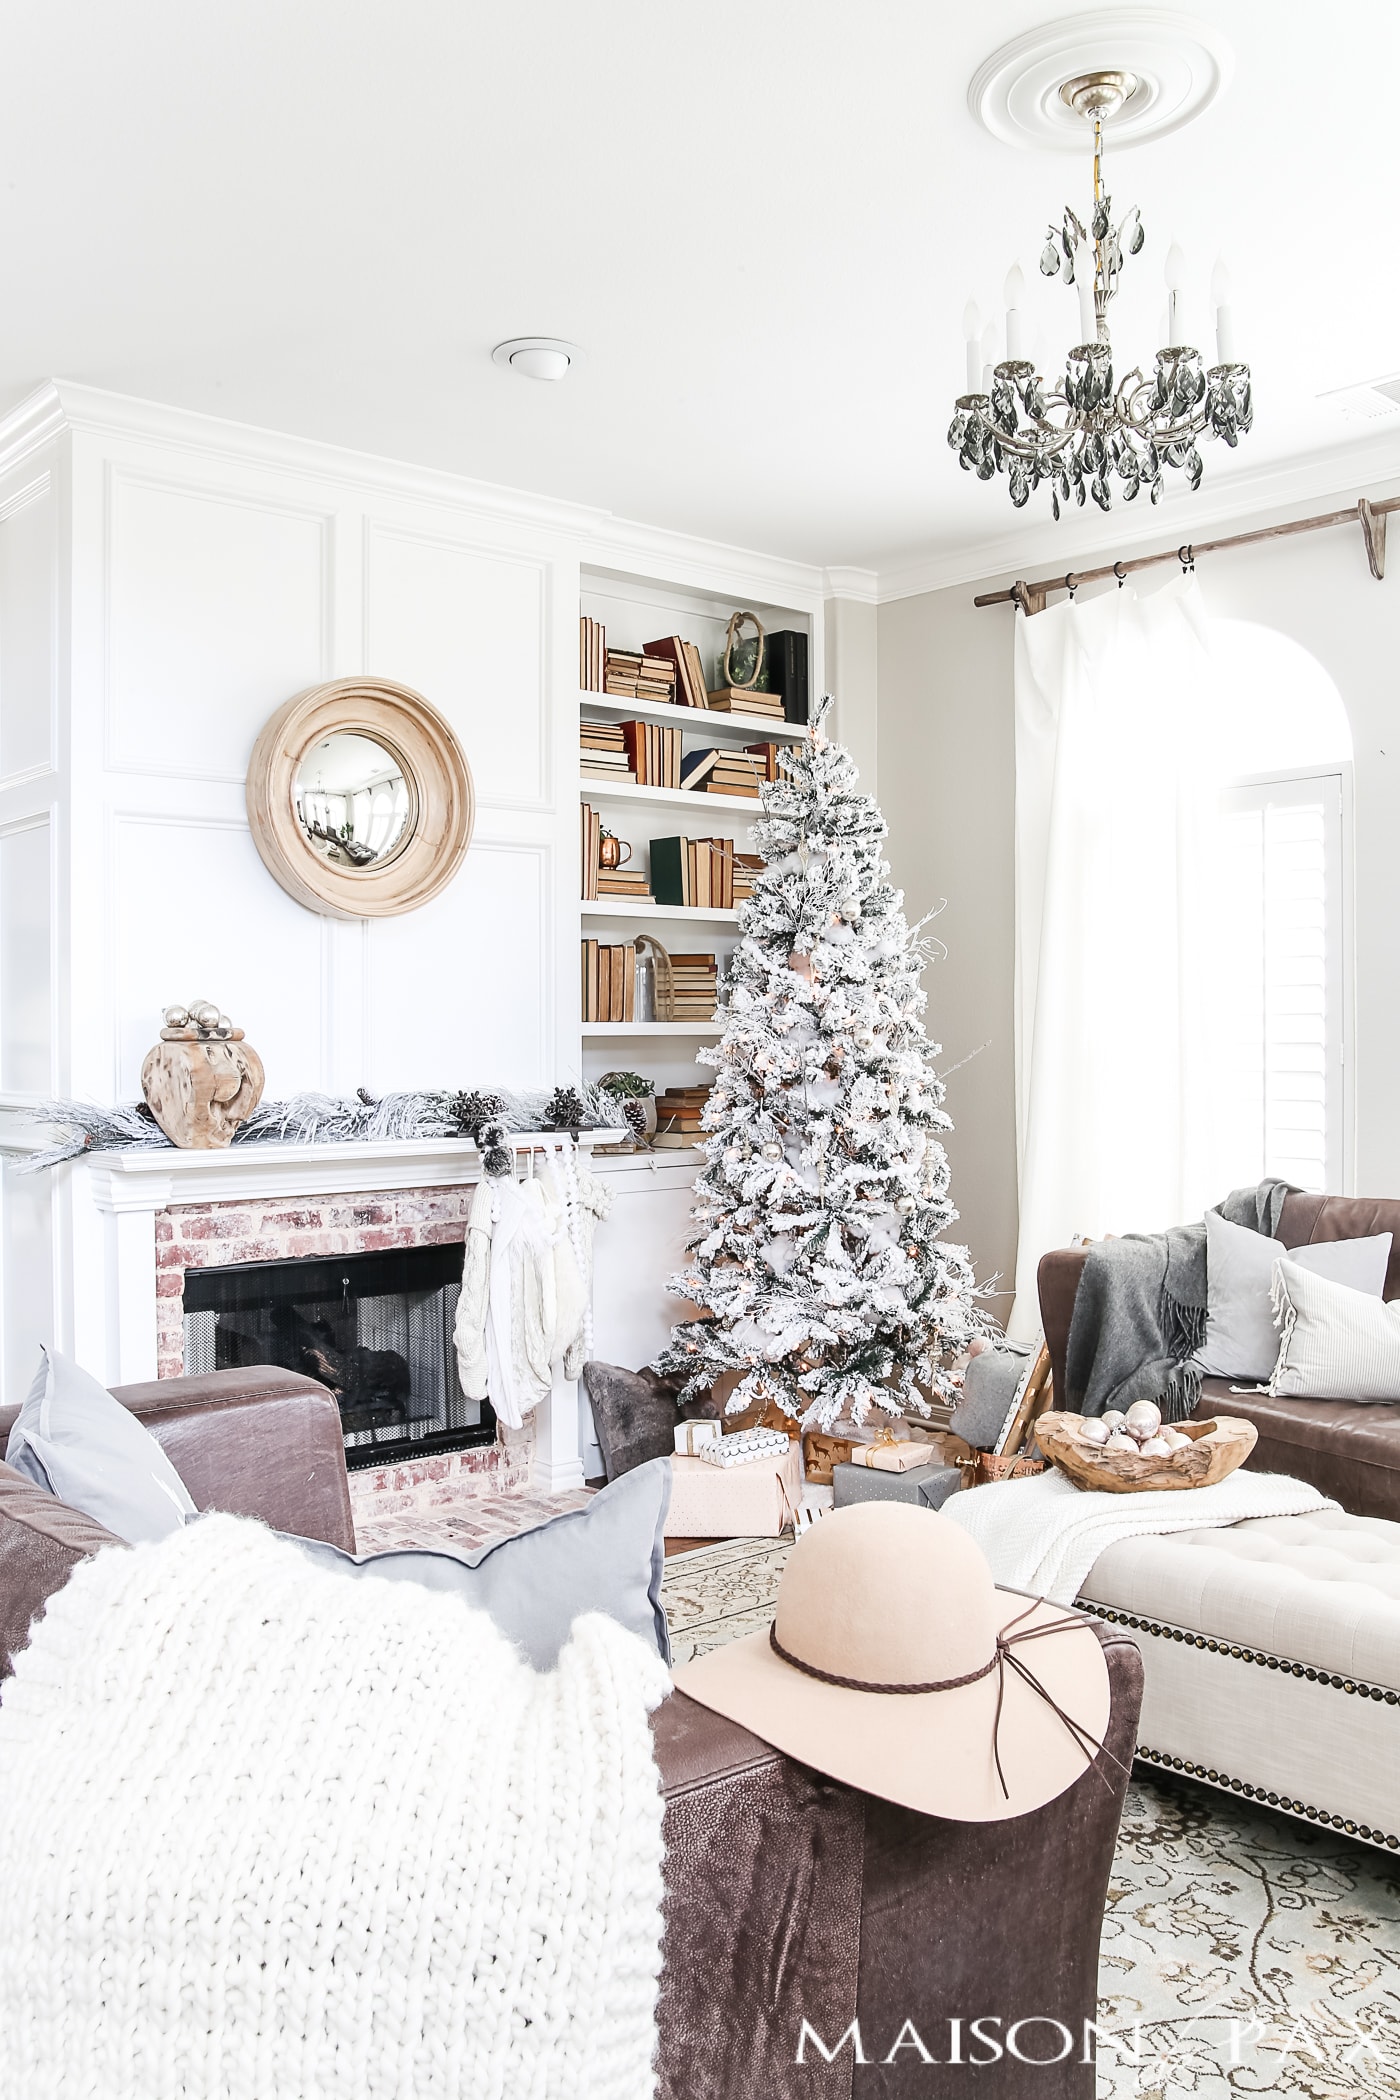 Tips for Simple, Elegant Holiday Decor